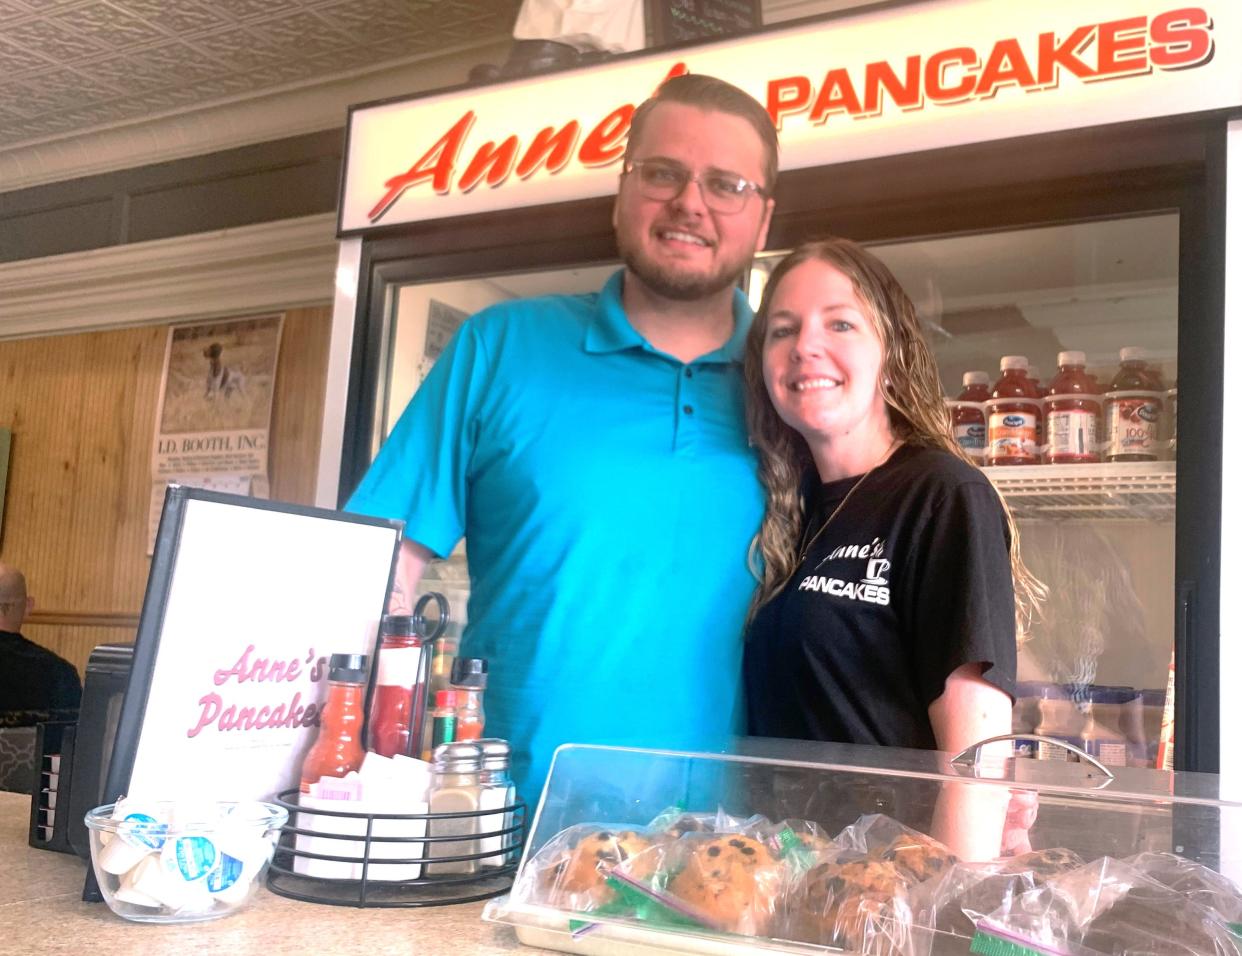 Jared and Yolanda Fish own Anne's Pancakes at 114 S. Main St. in Elmira.